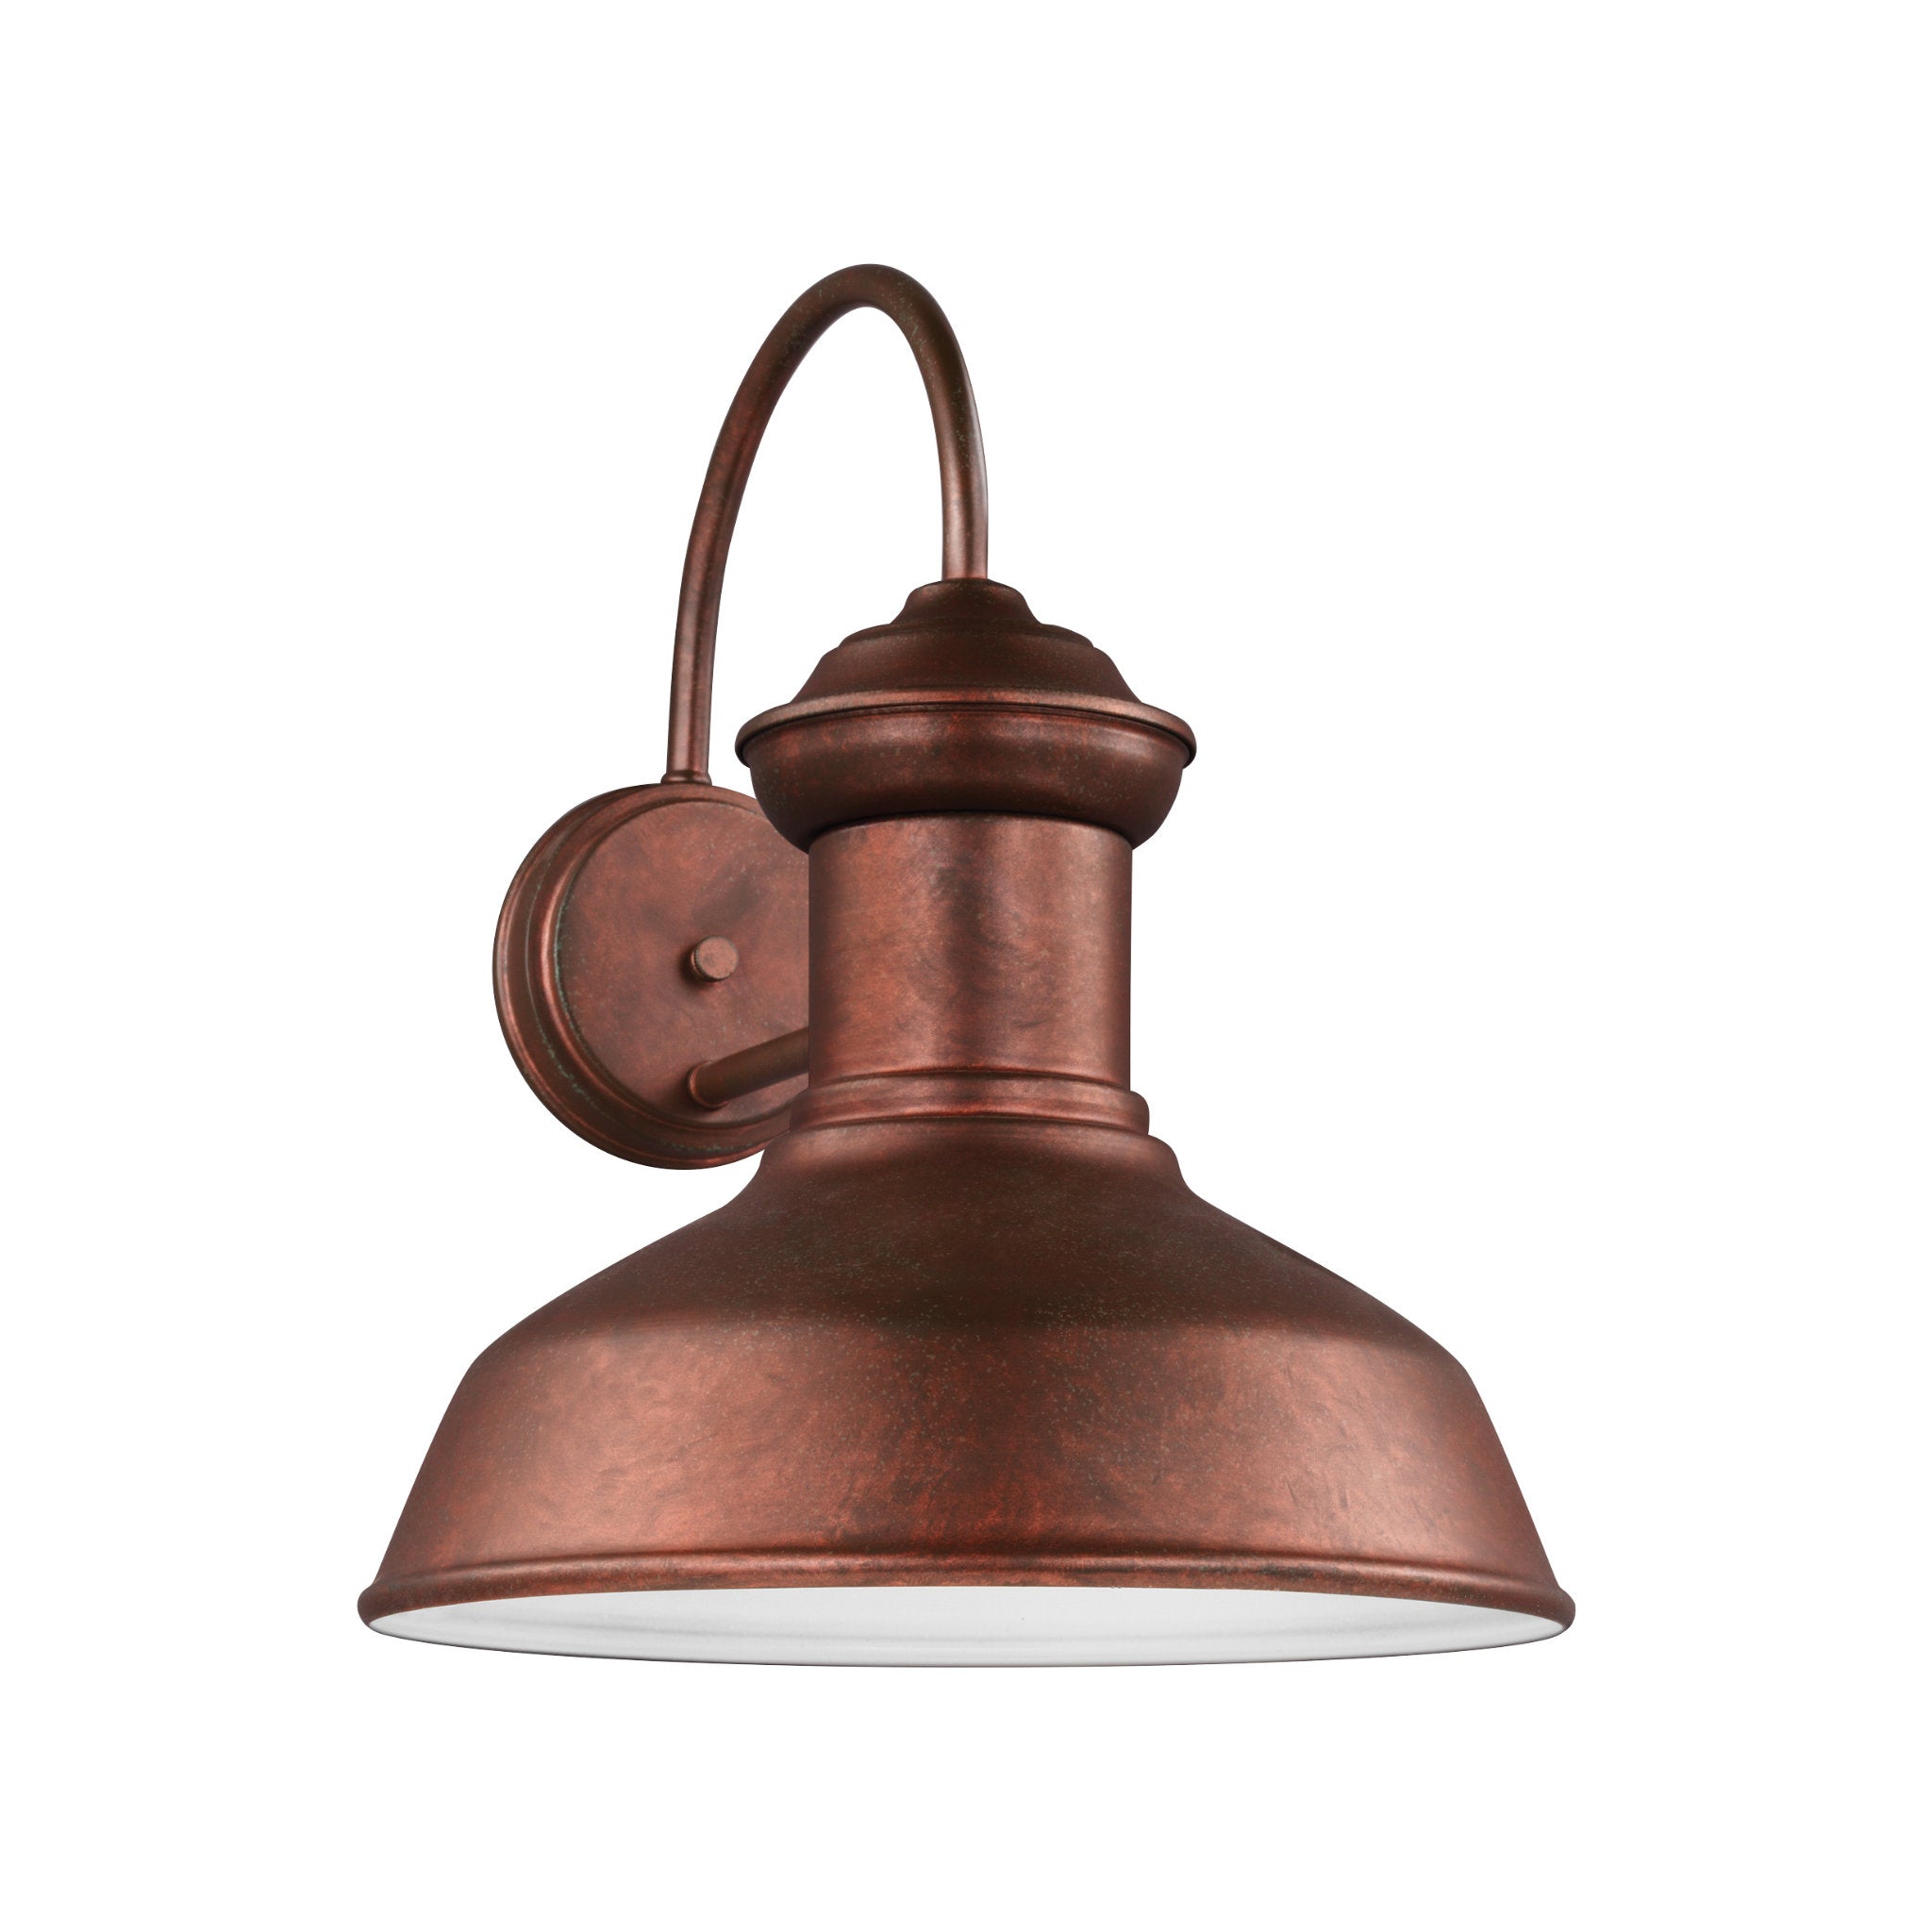 Fredricksburg Large One Light Outdoor Wall Lantern Traditional Fixture 13.25" Width 15.875" Height Aluminum in Weathered Copper